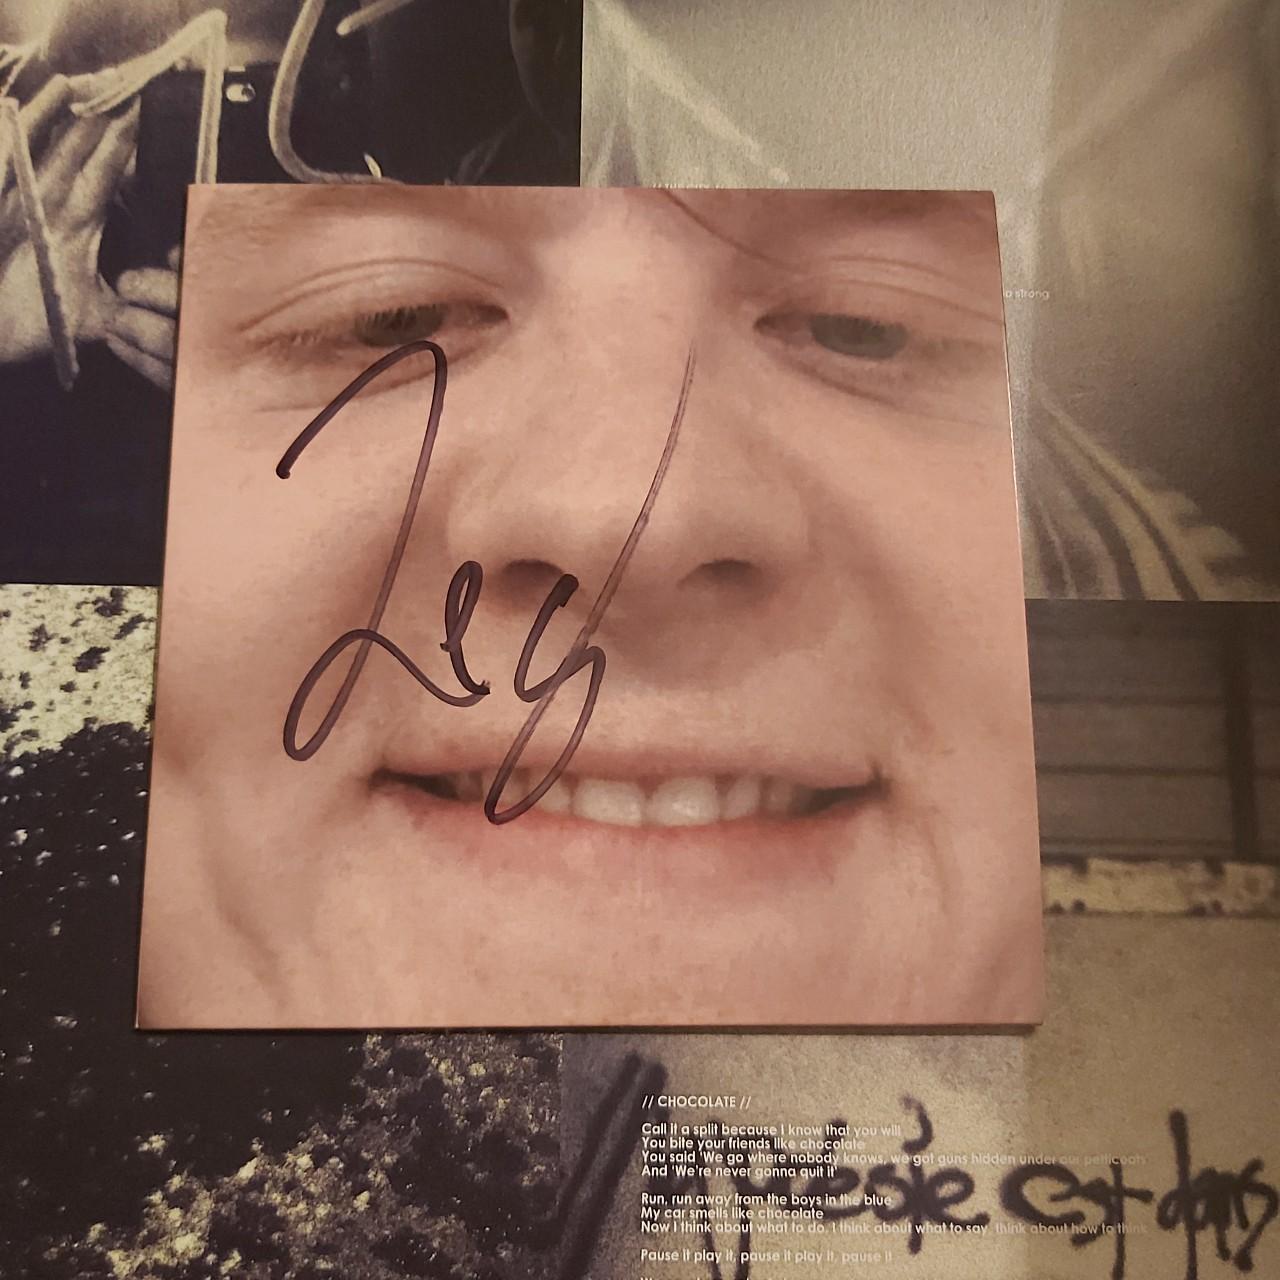 Lewis Capaldi sells signed CD's of Pointless for just pennies